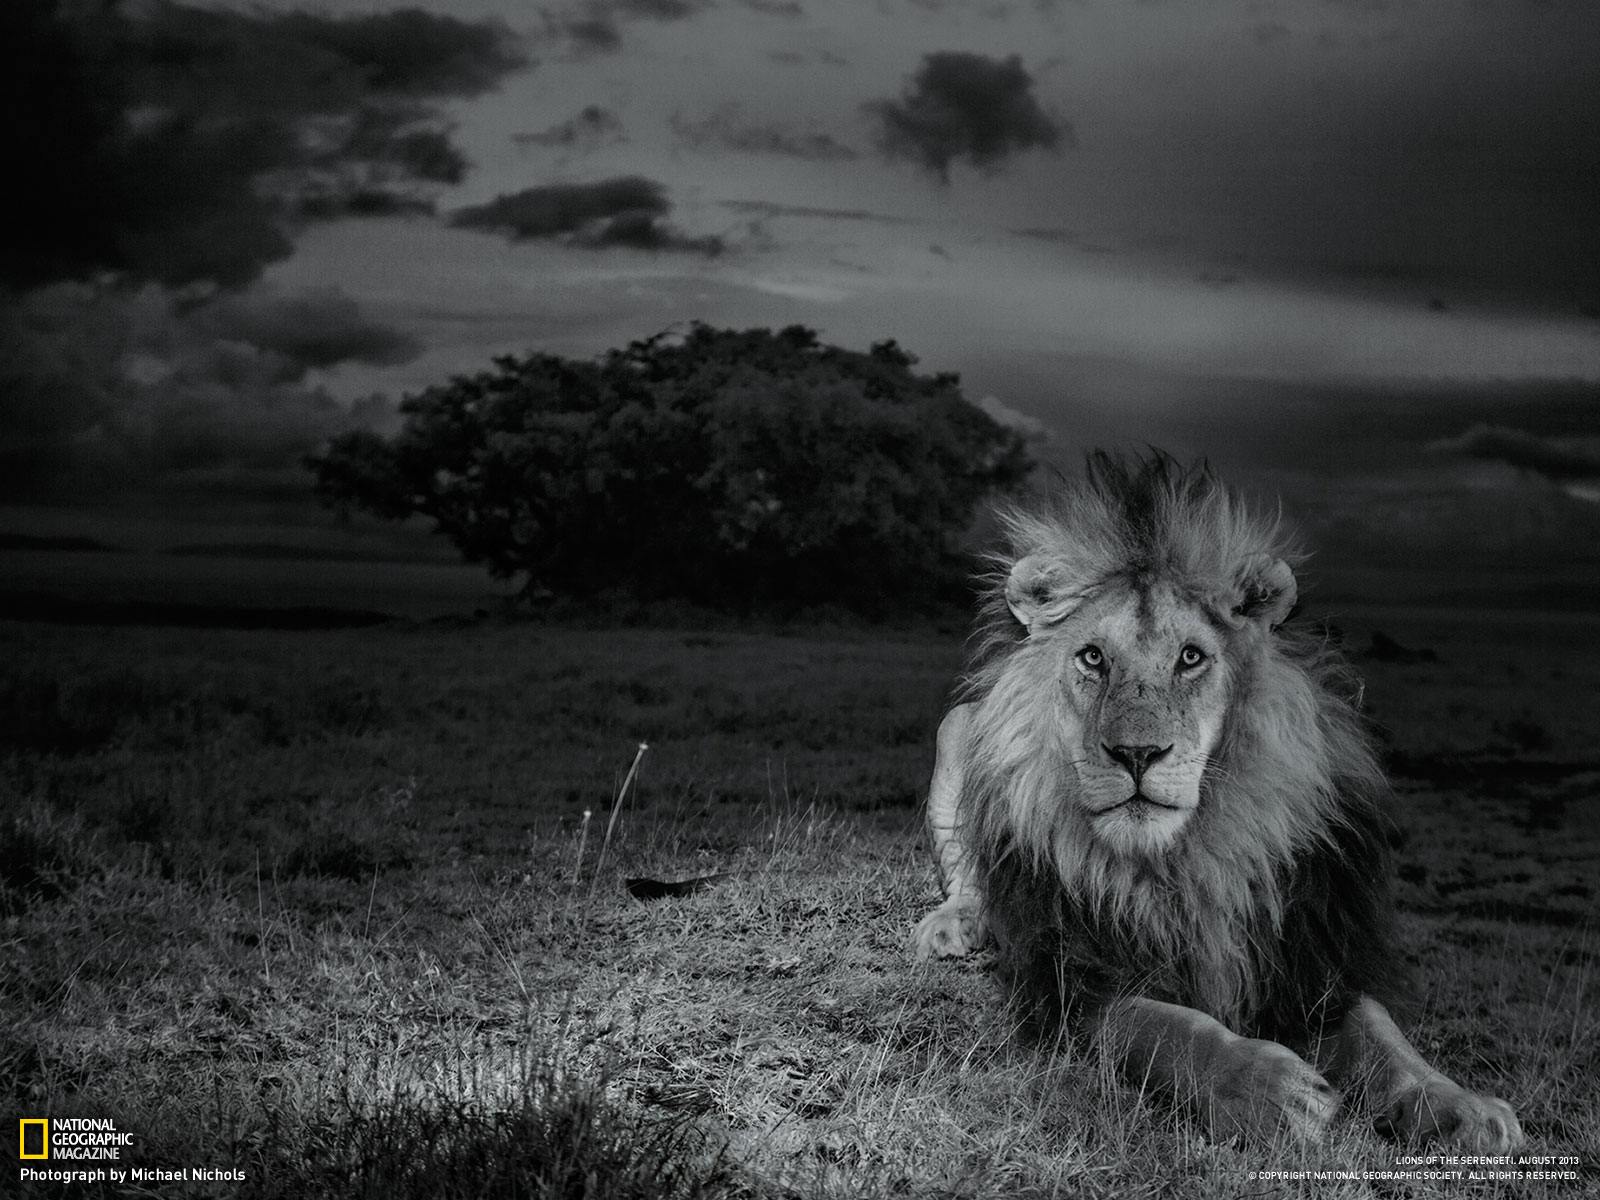 From Lions Of The Serengeti National Geographic August